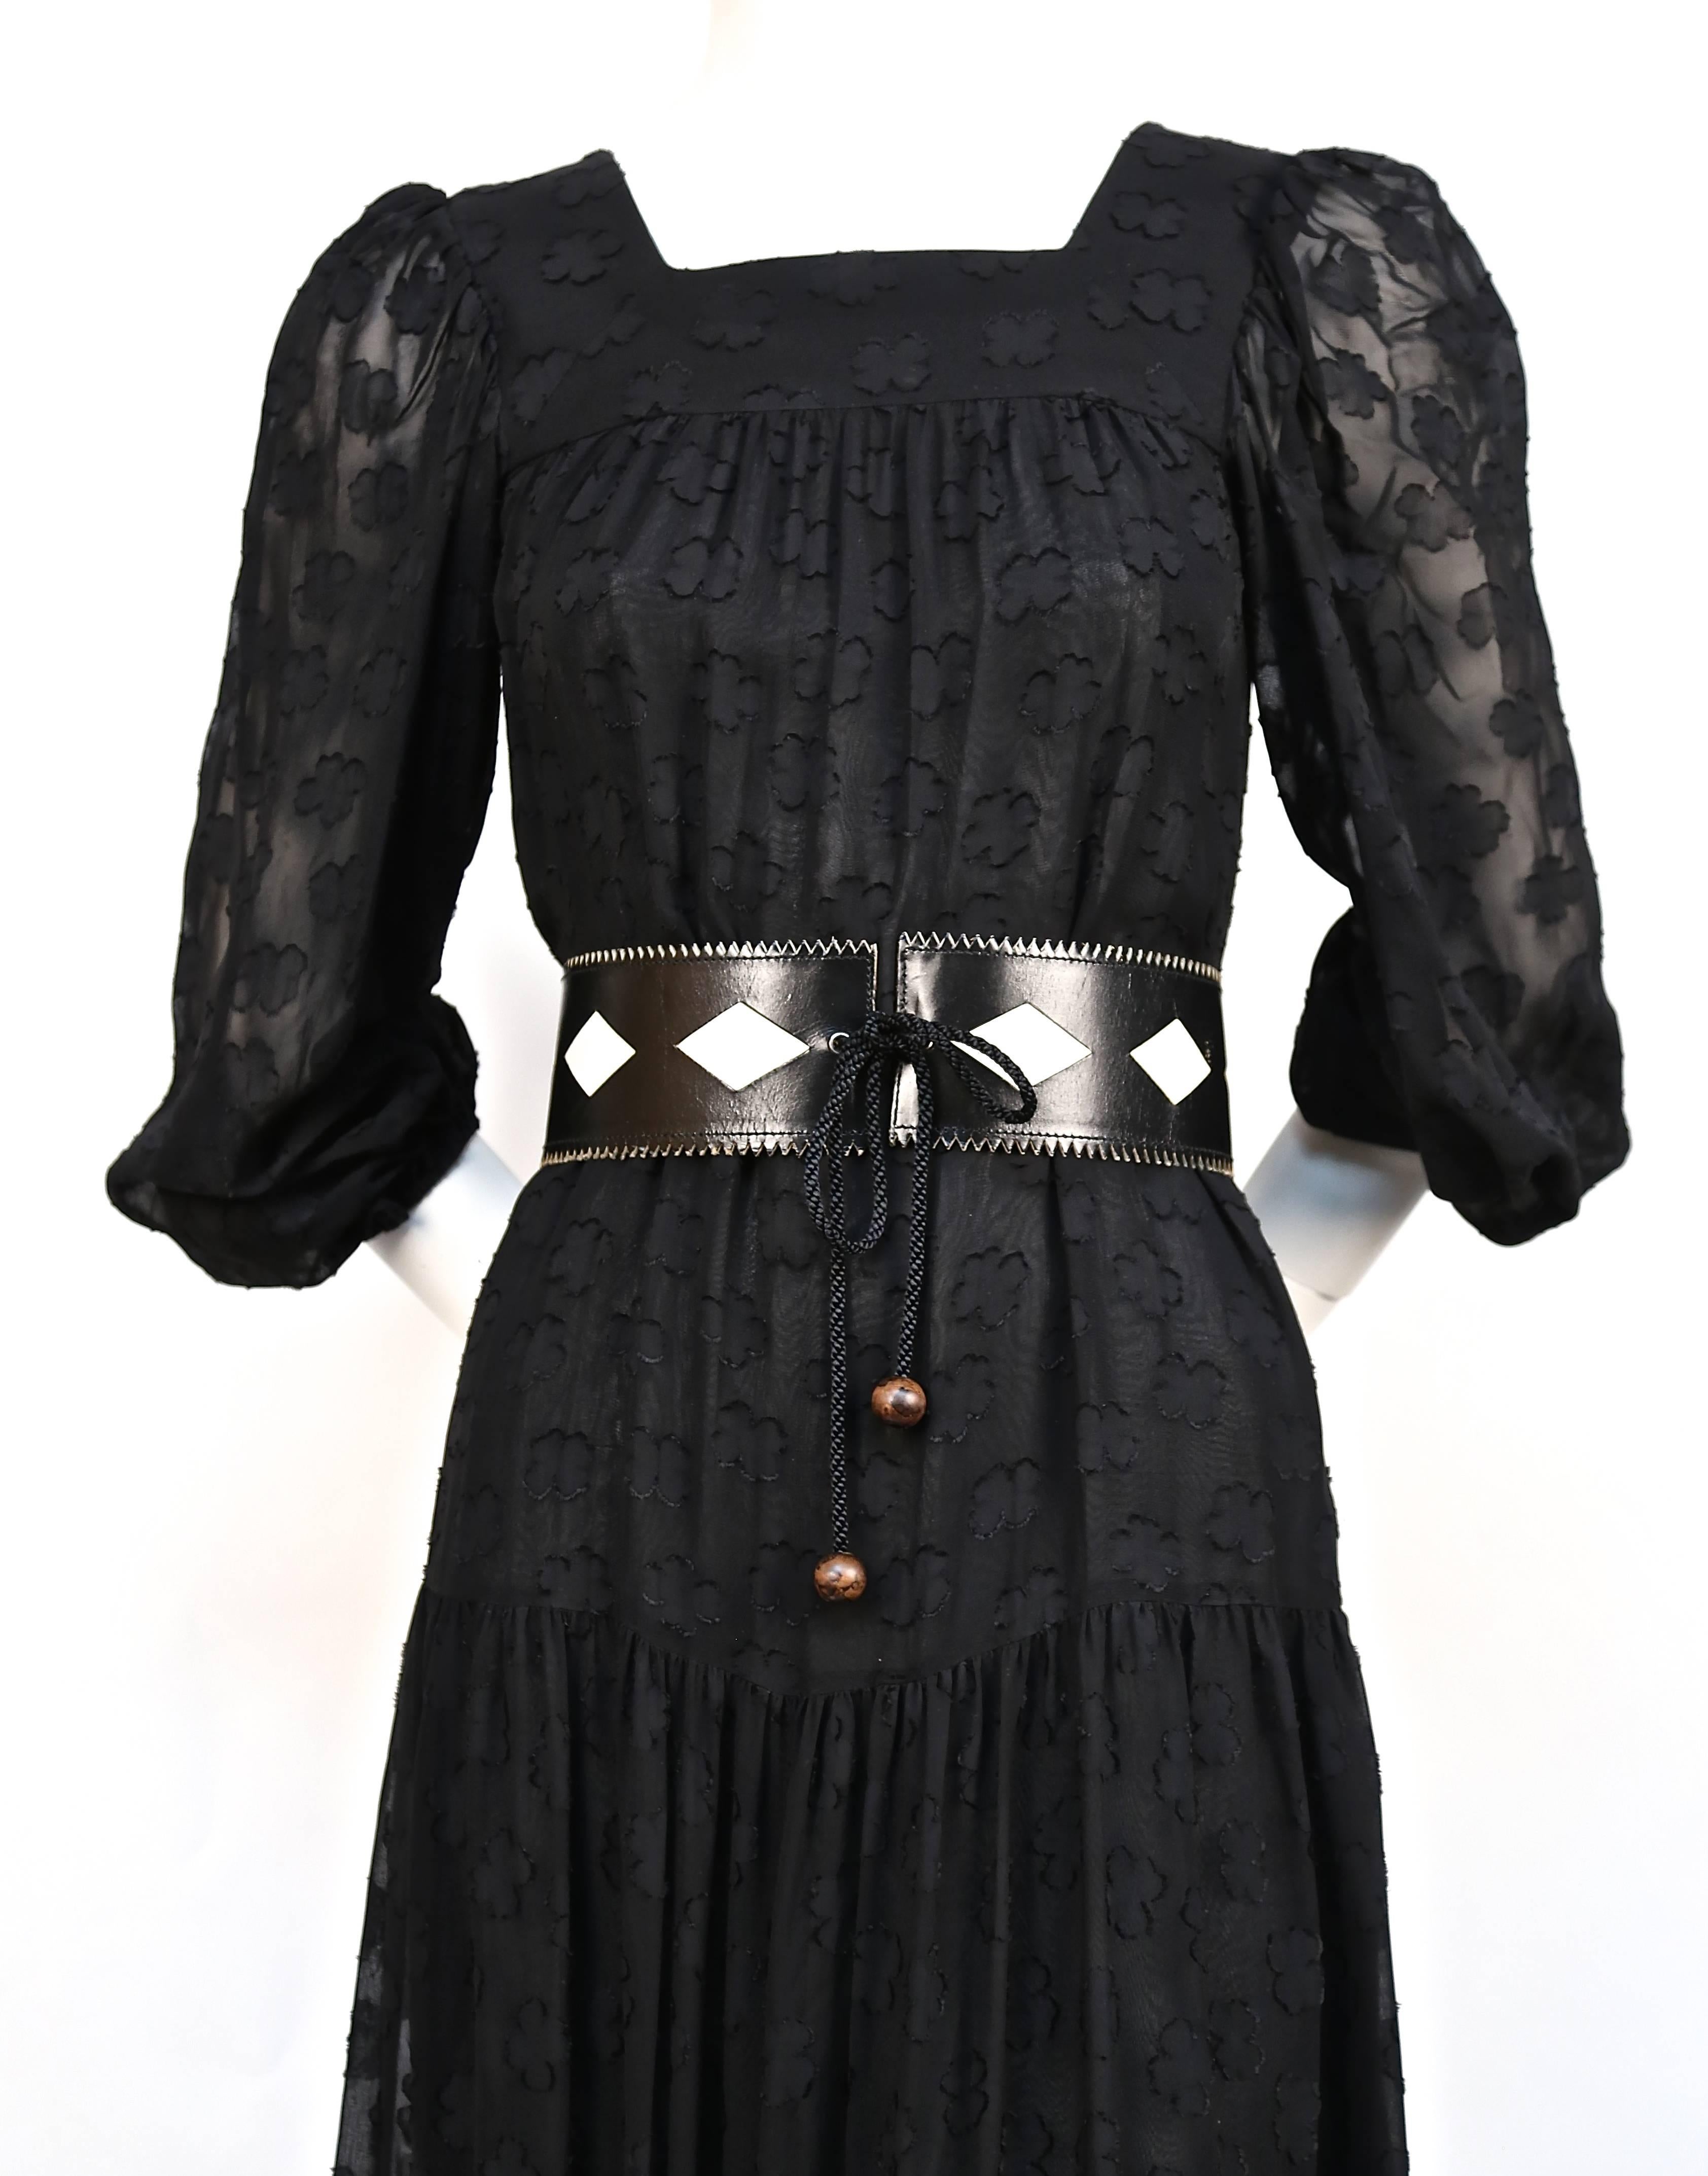 Black peasant dress with woven abstract floral pattern from Yves Saint Laurent dating to the 1970's. Best fits a French 34 or 36. Approximate measurements: shoulder 13", underarm to underarm 30", bust 32", hips 42" and length